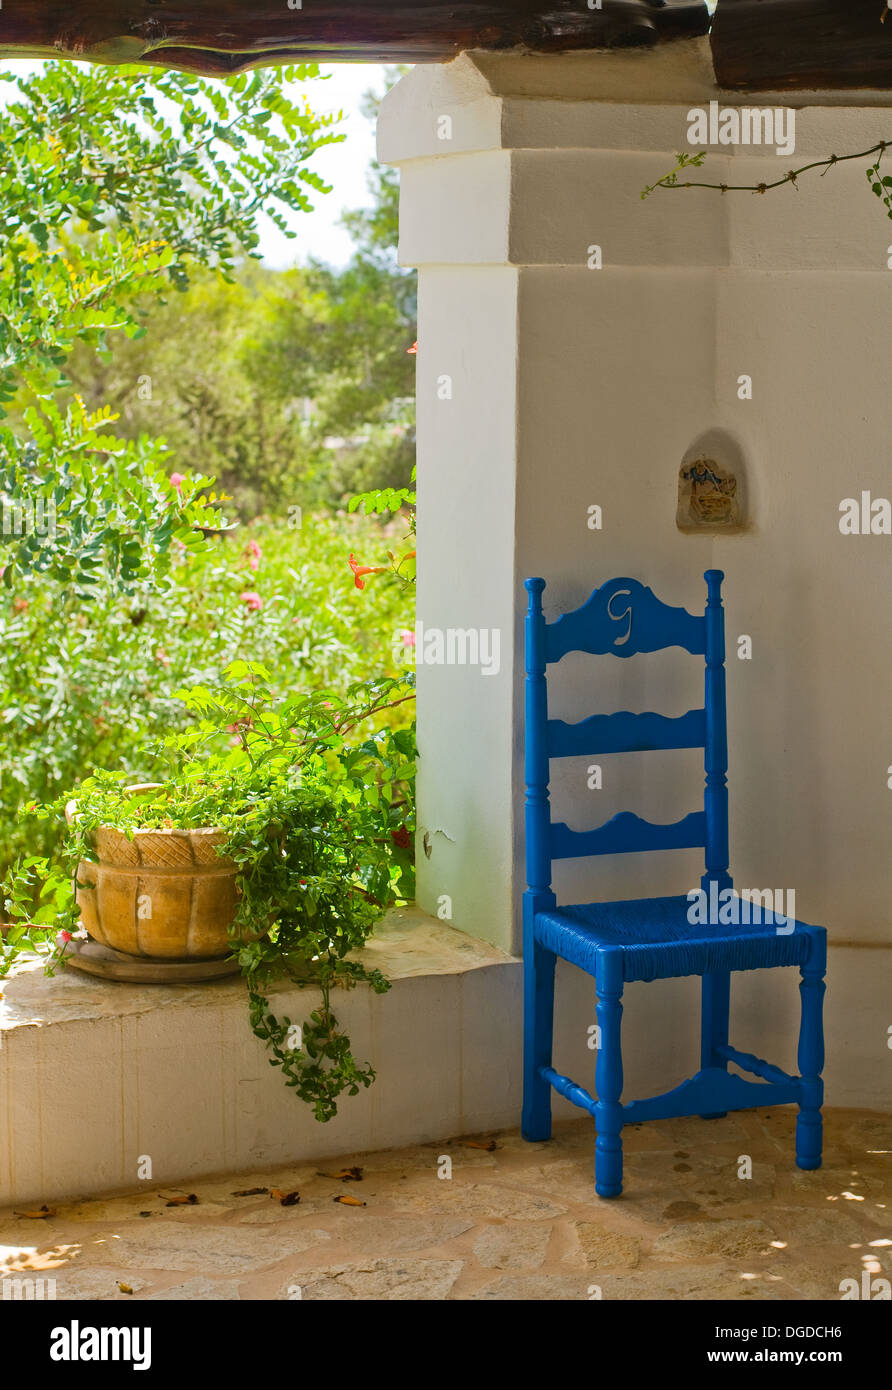 Antique Blue Wooden and Wicker Chair in a Porch and Sunlit Garden Stock Photo